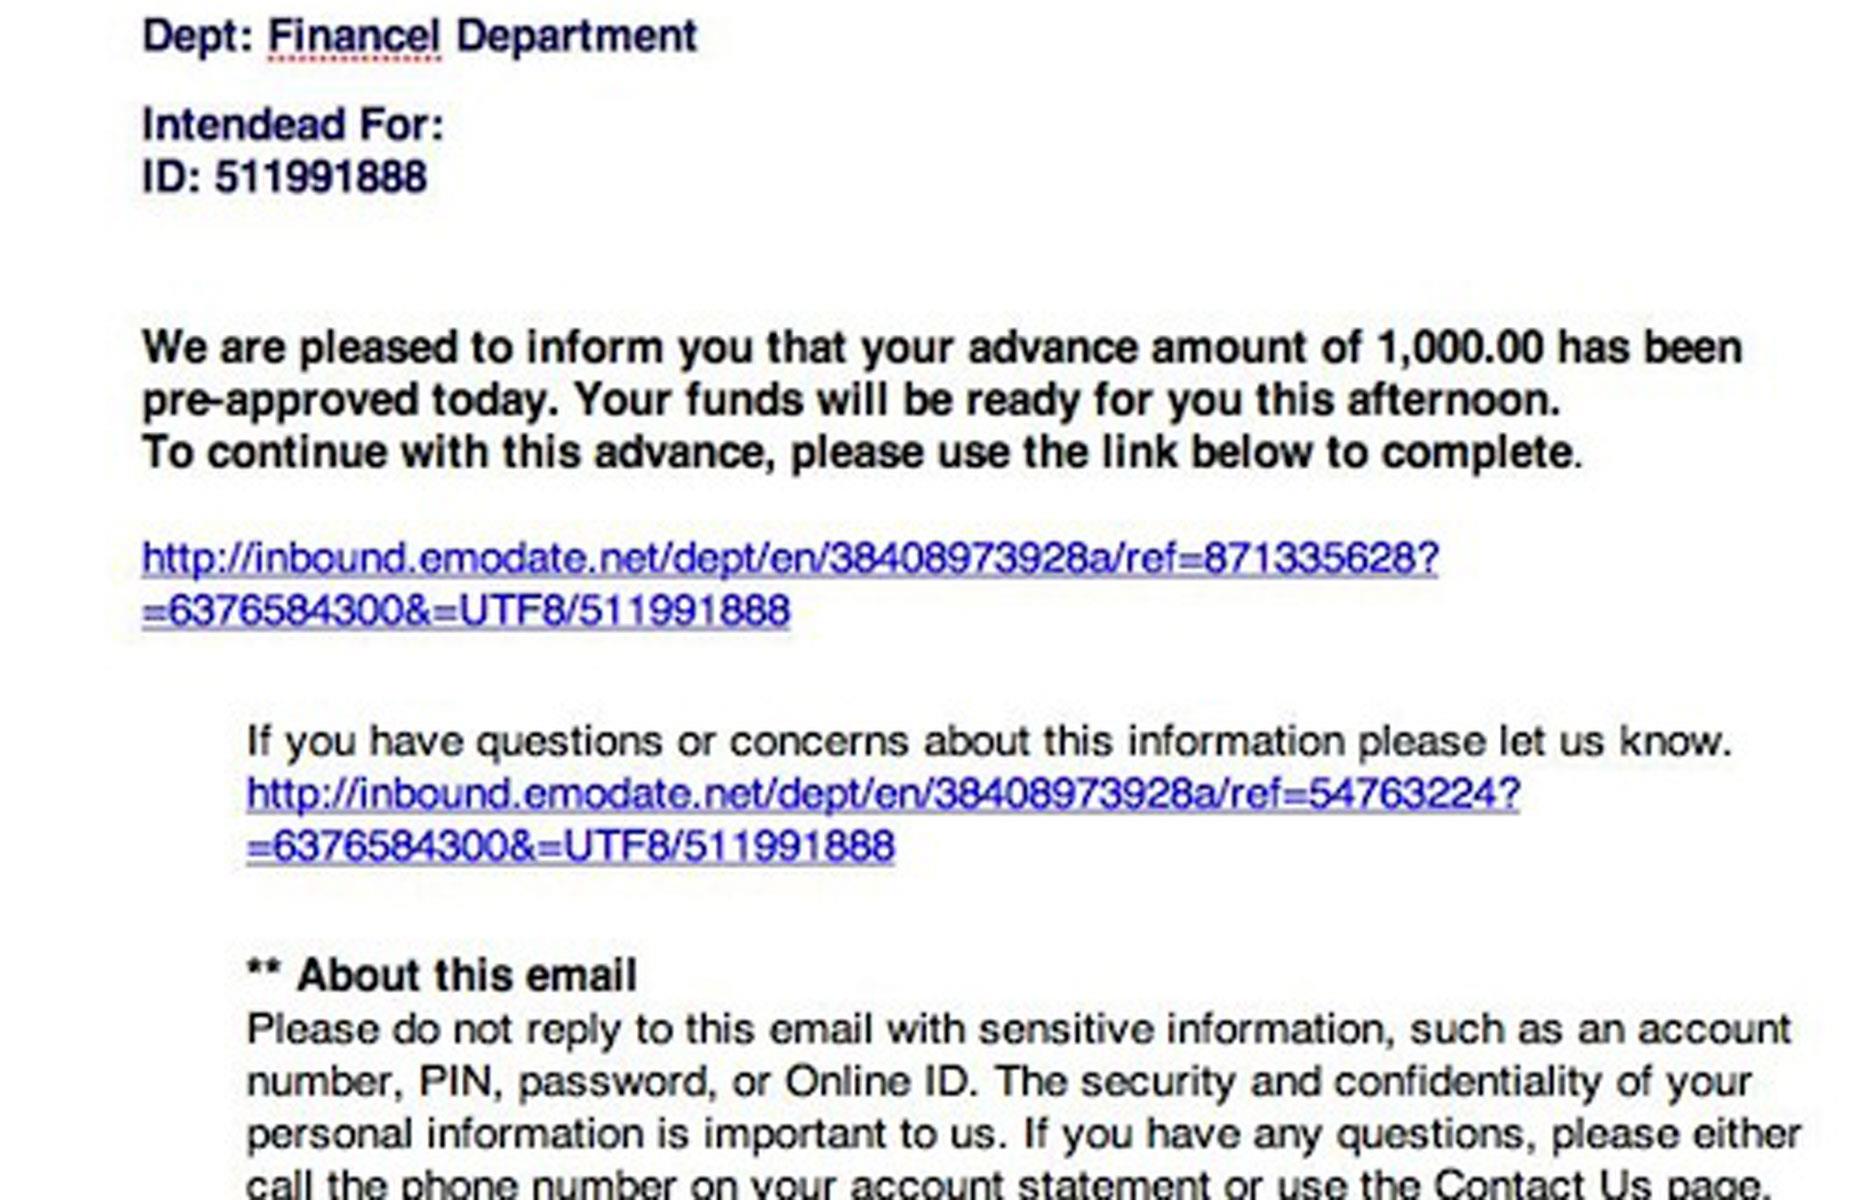 Fake student loans phishing emails: how to beat them